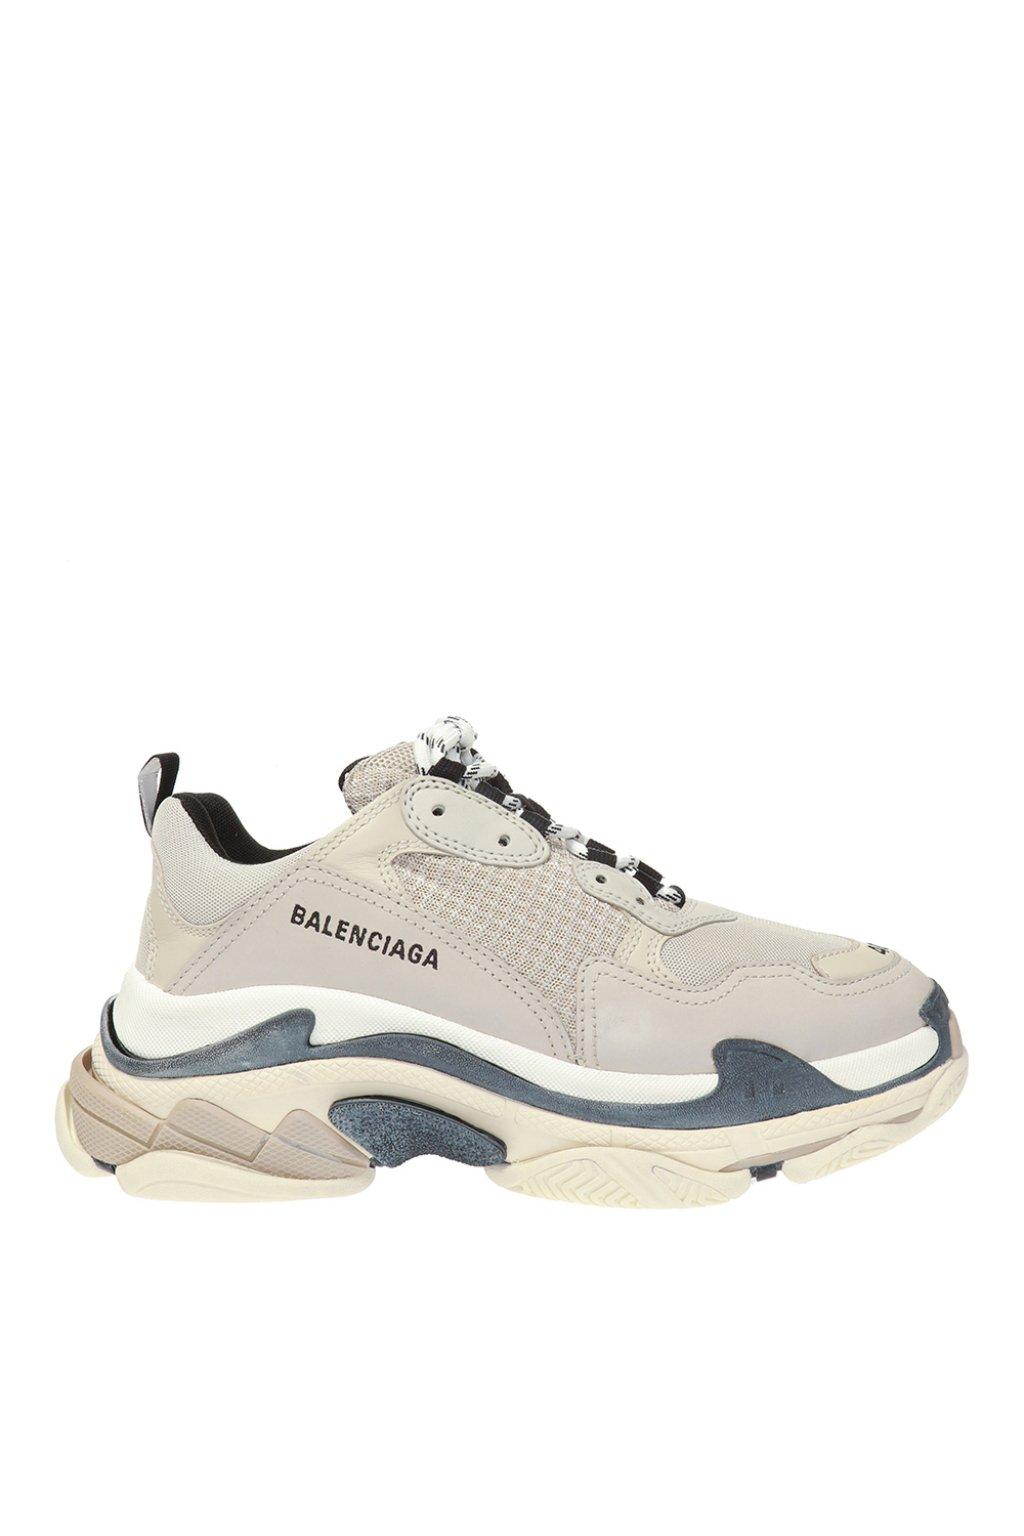 Balenciaga Leather Triple S Trainers in Beige (Natural) for Men | Lyst